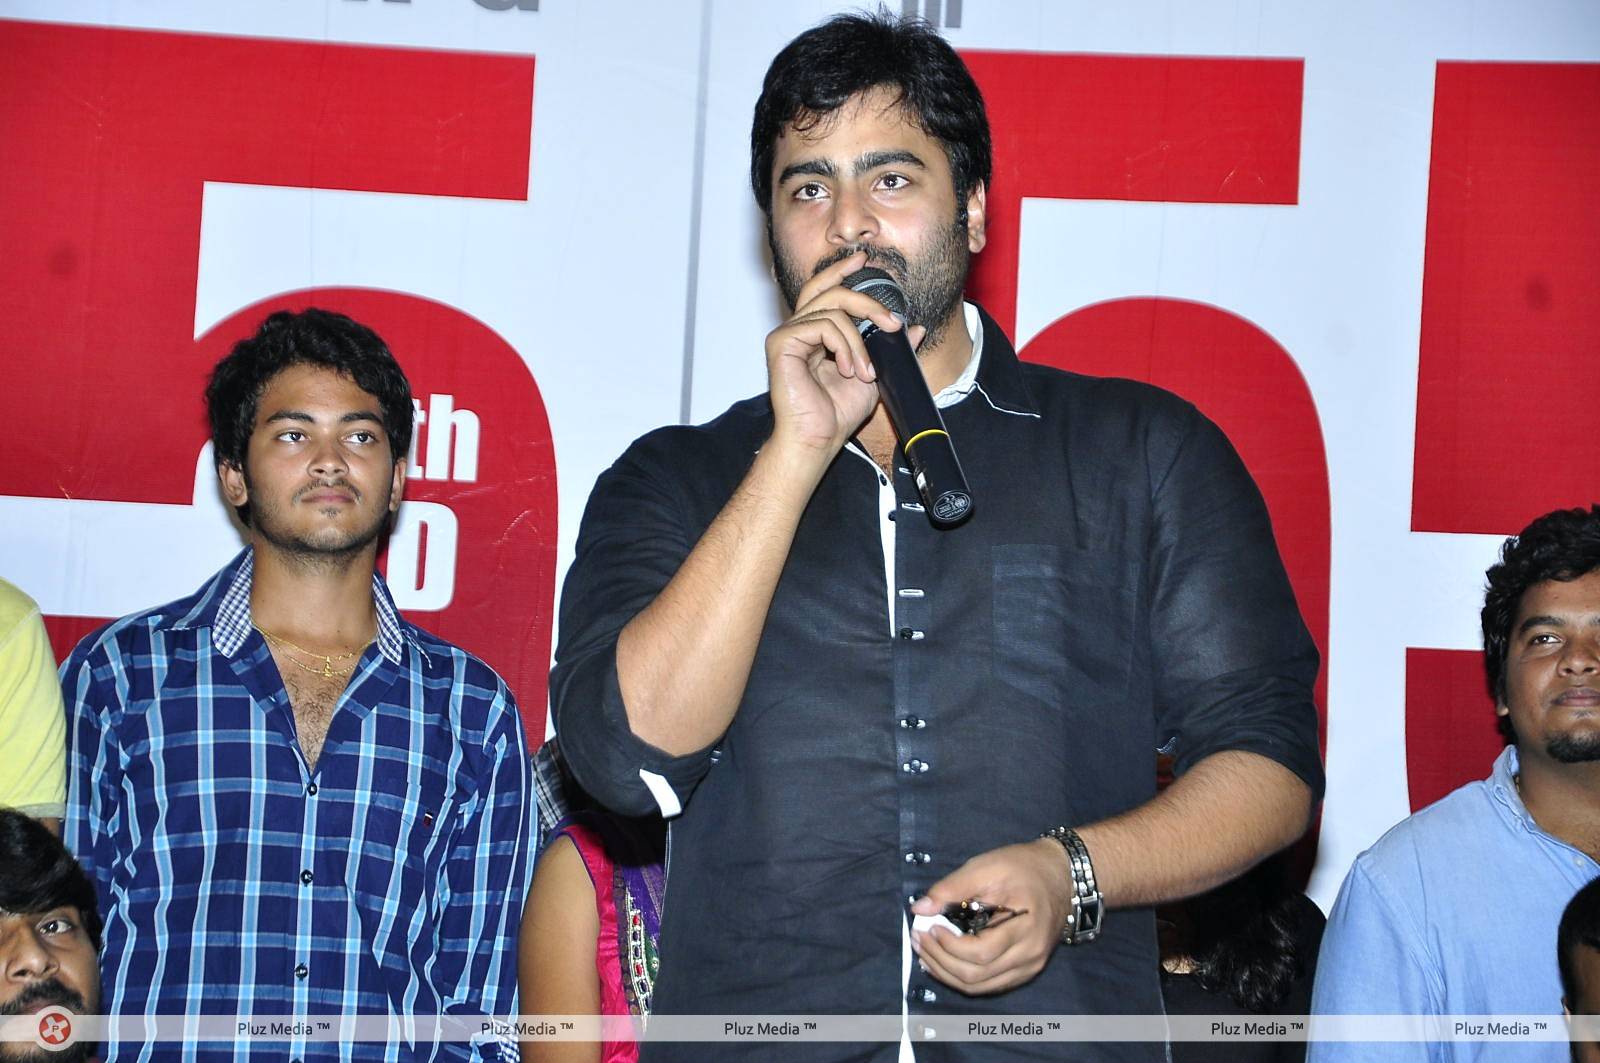 Nara Rohit - 3G Love Movie 25 days Celebrations Pictures | Picture 427868